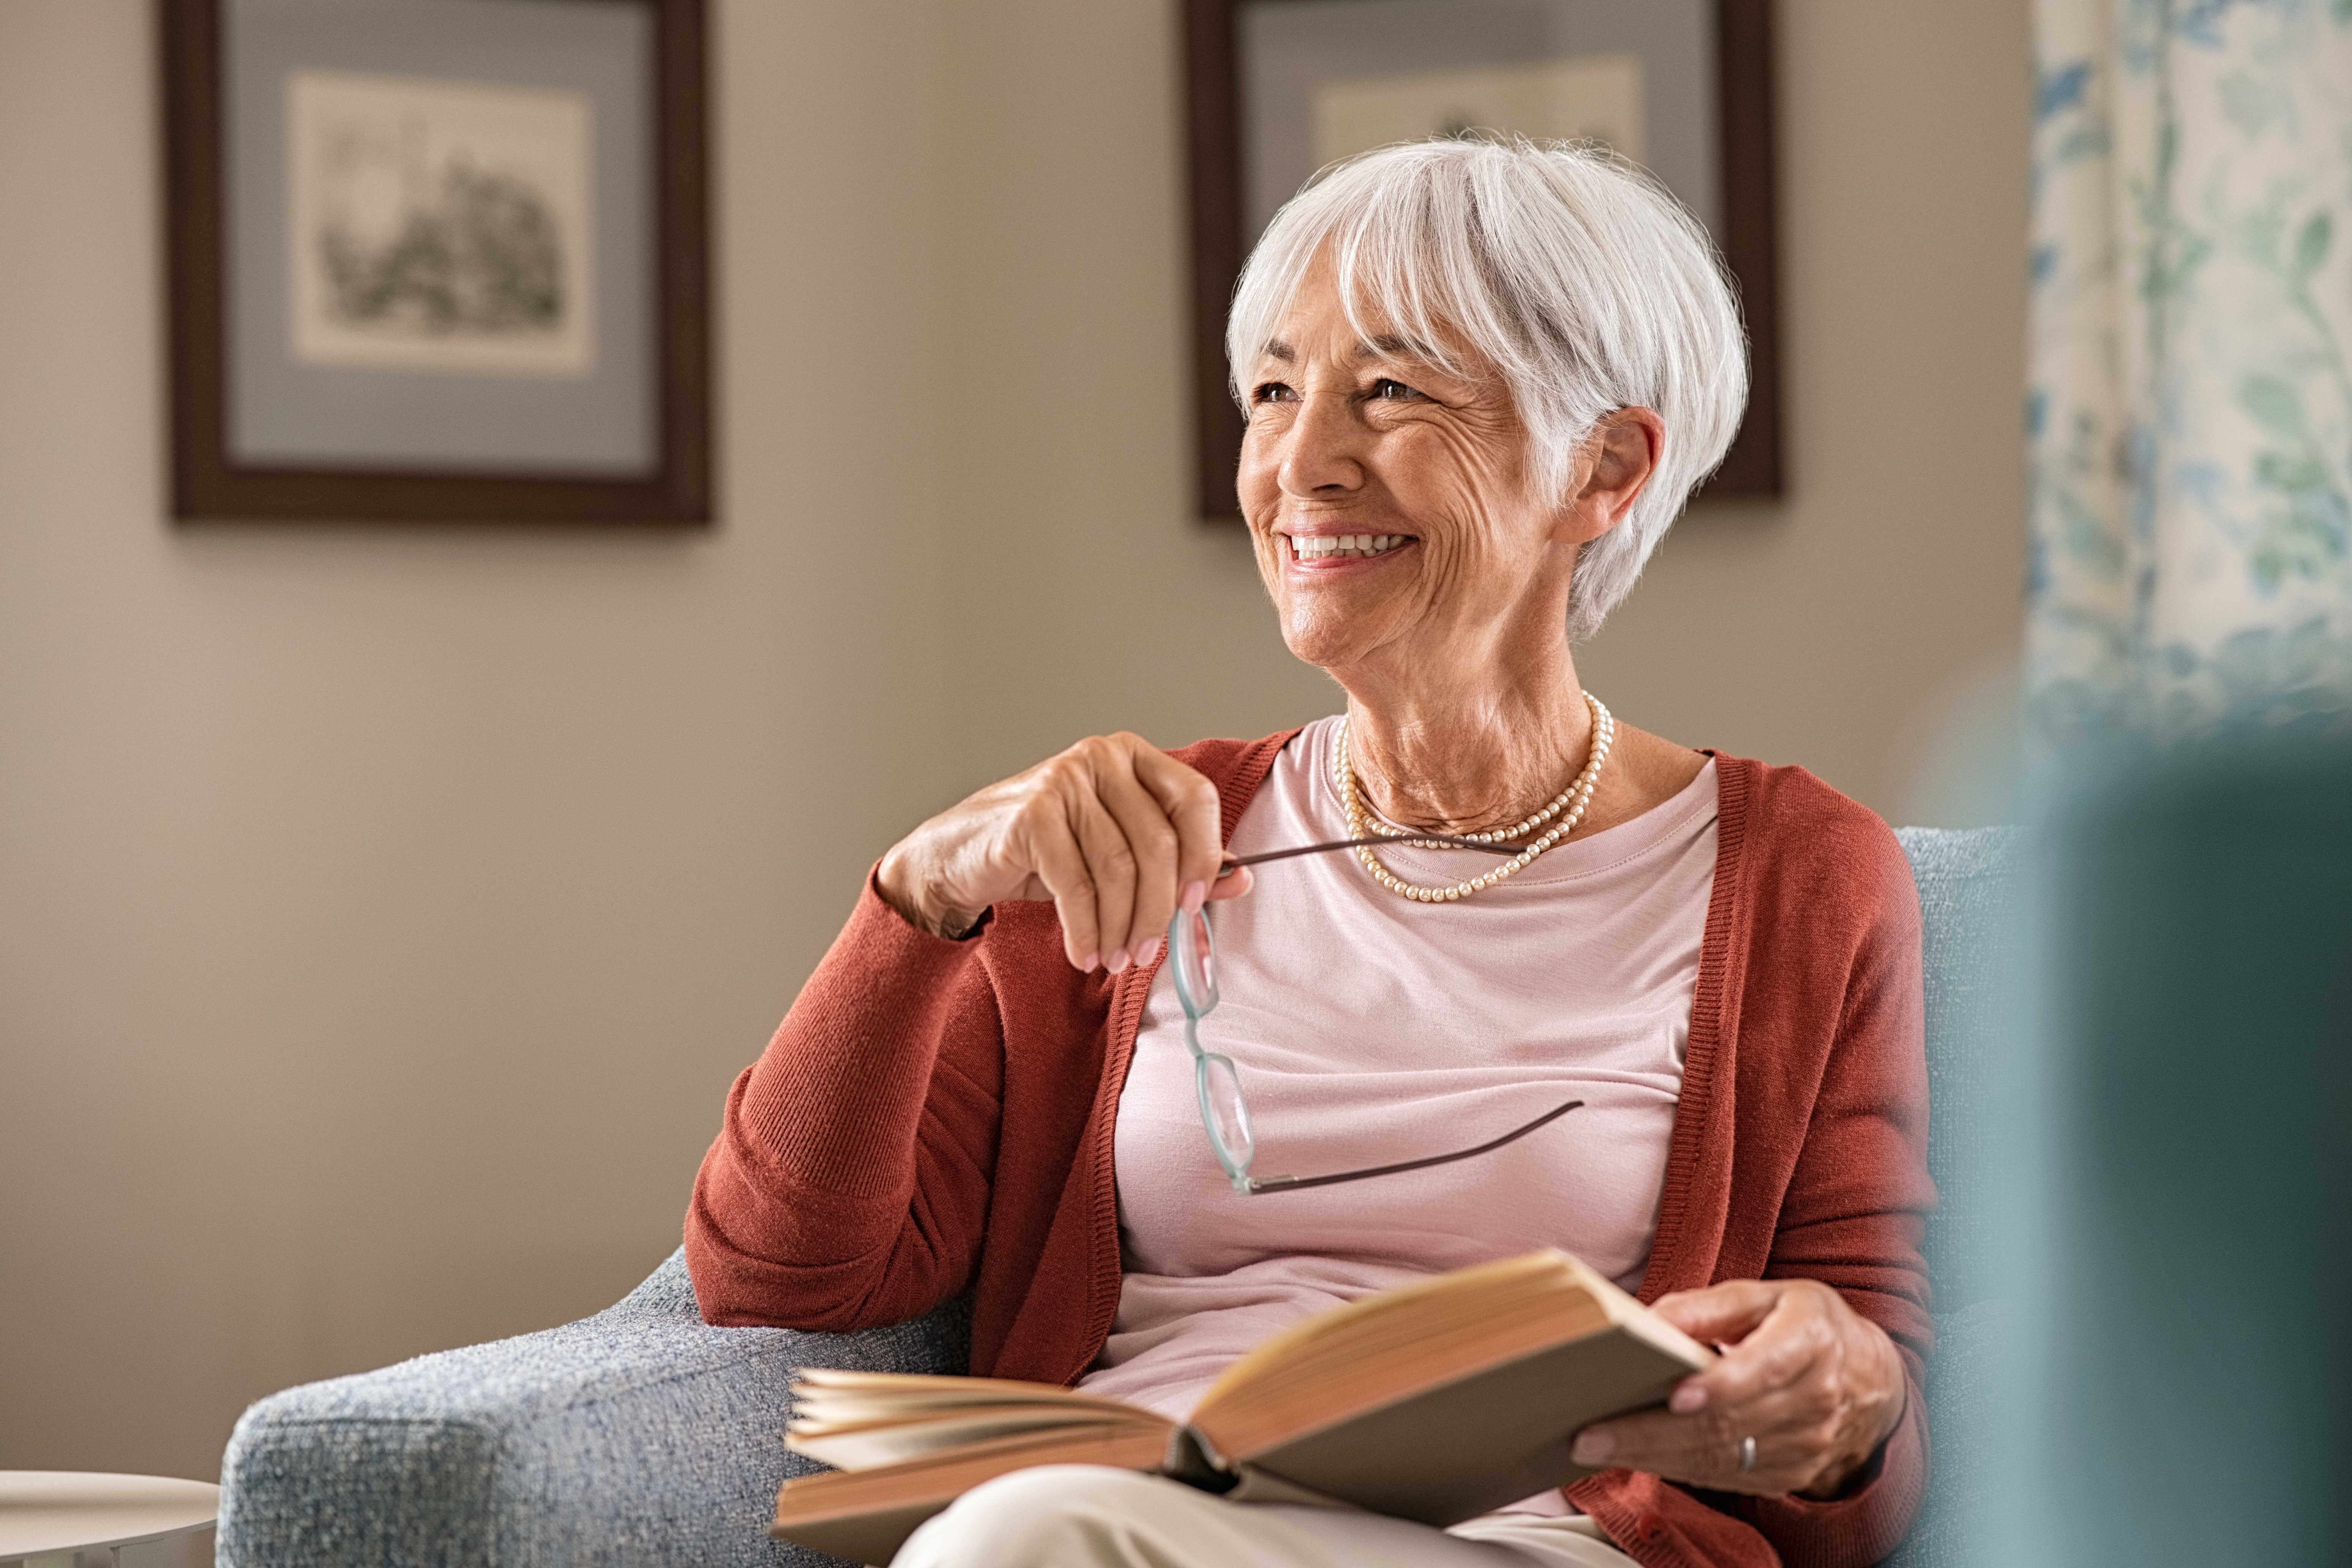 Happy senior woman smiling at home | Source: Getty Images